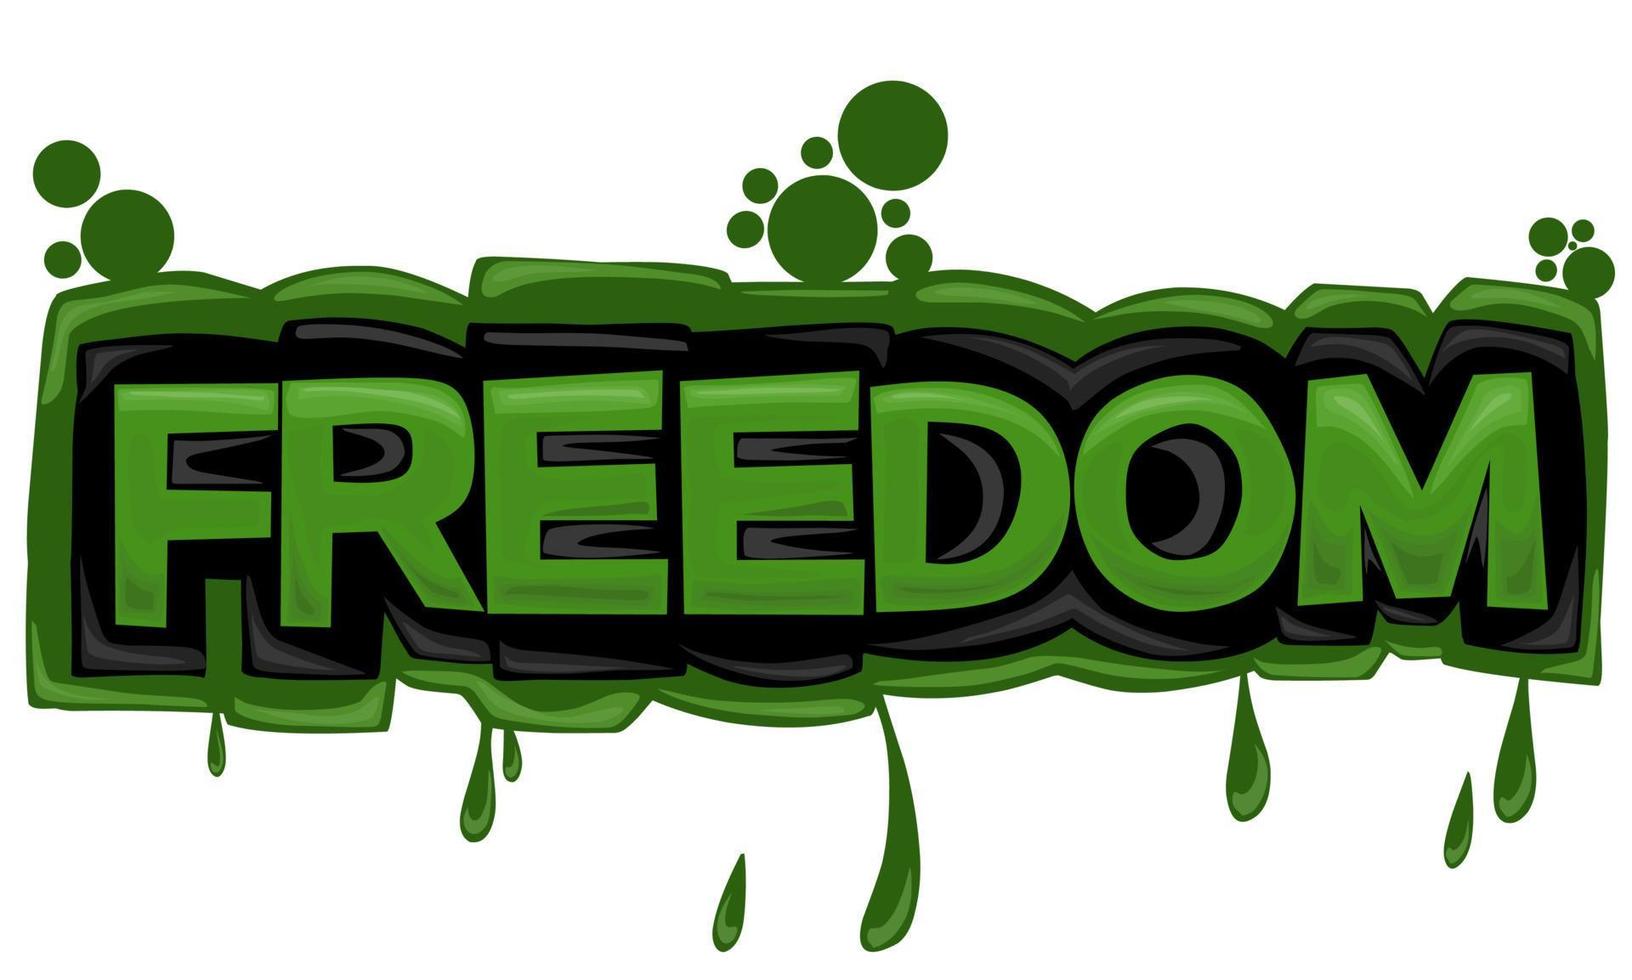 FREEDOM writing graffiti design on a white background vector